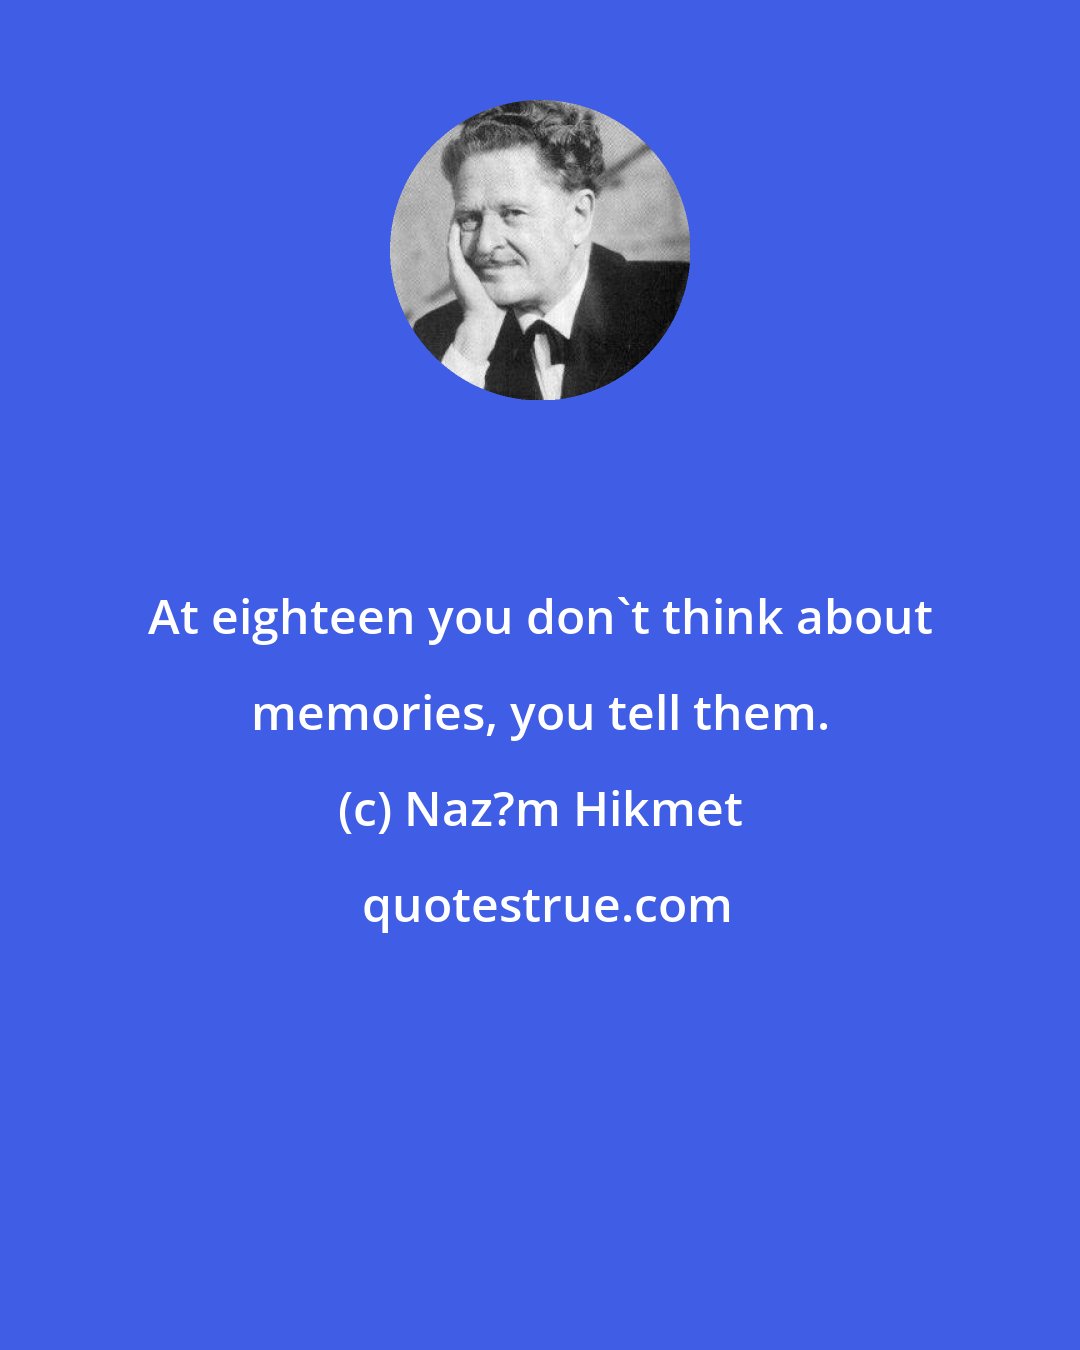 Naz?m Hikmet: At eighteen you don't think about memories, you tell them.